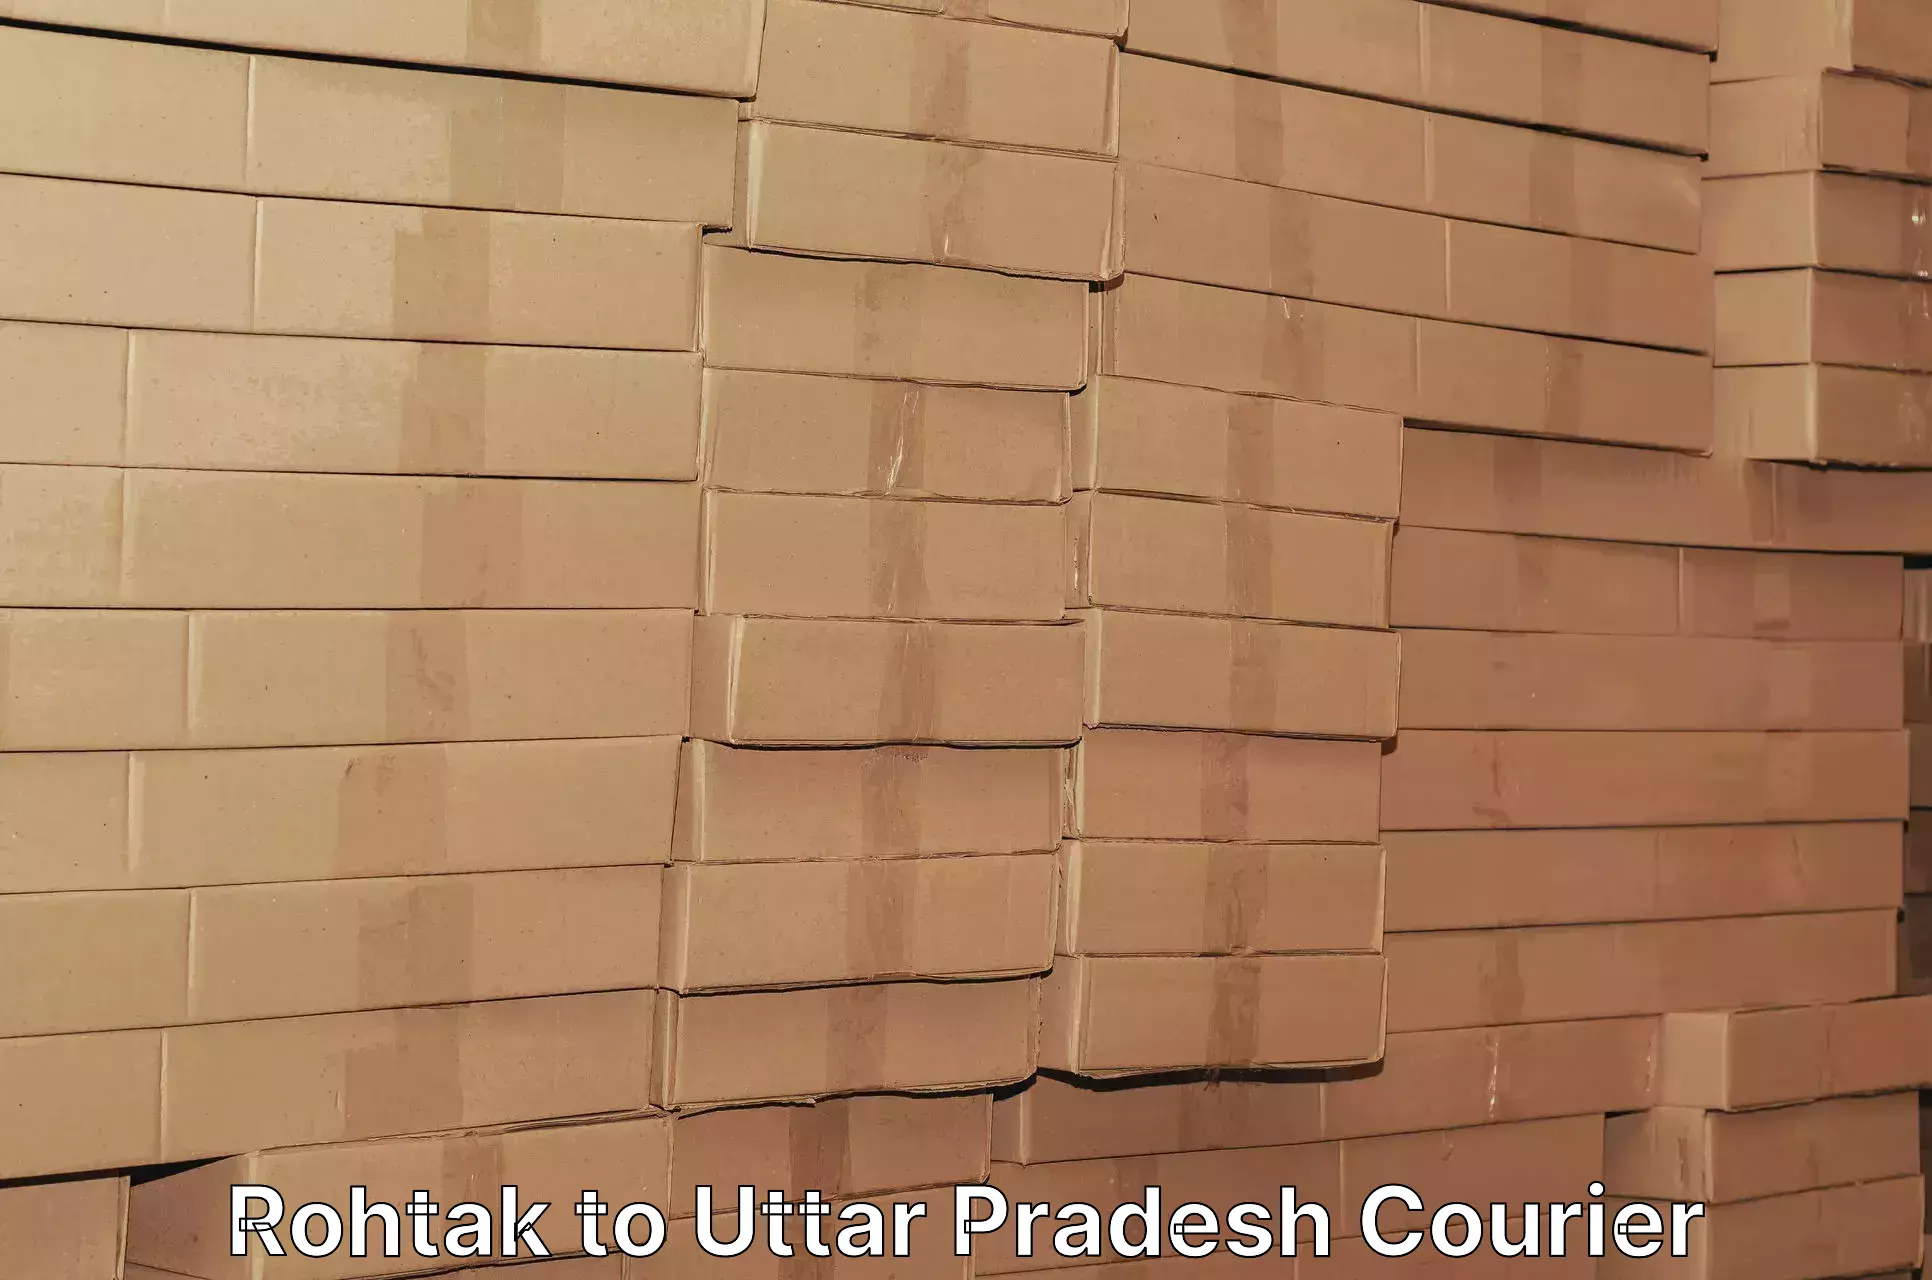 Automated parcel services Rohtak to Khair